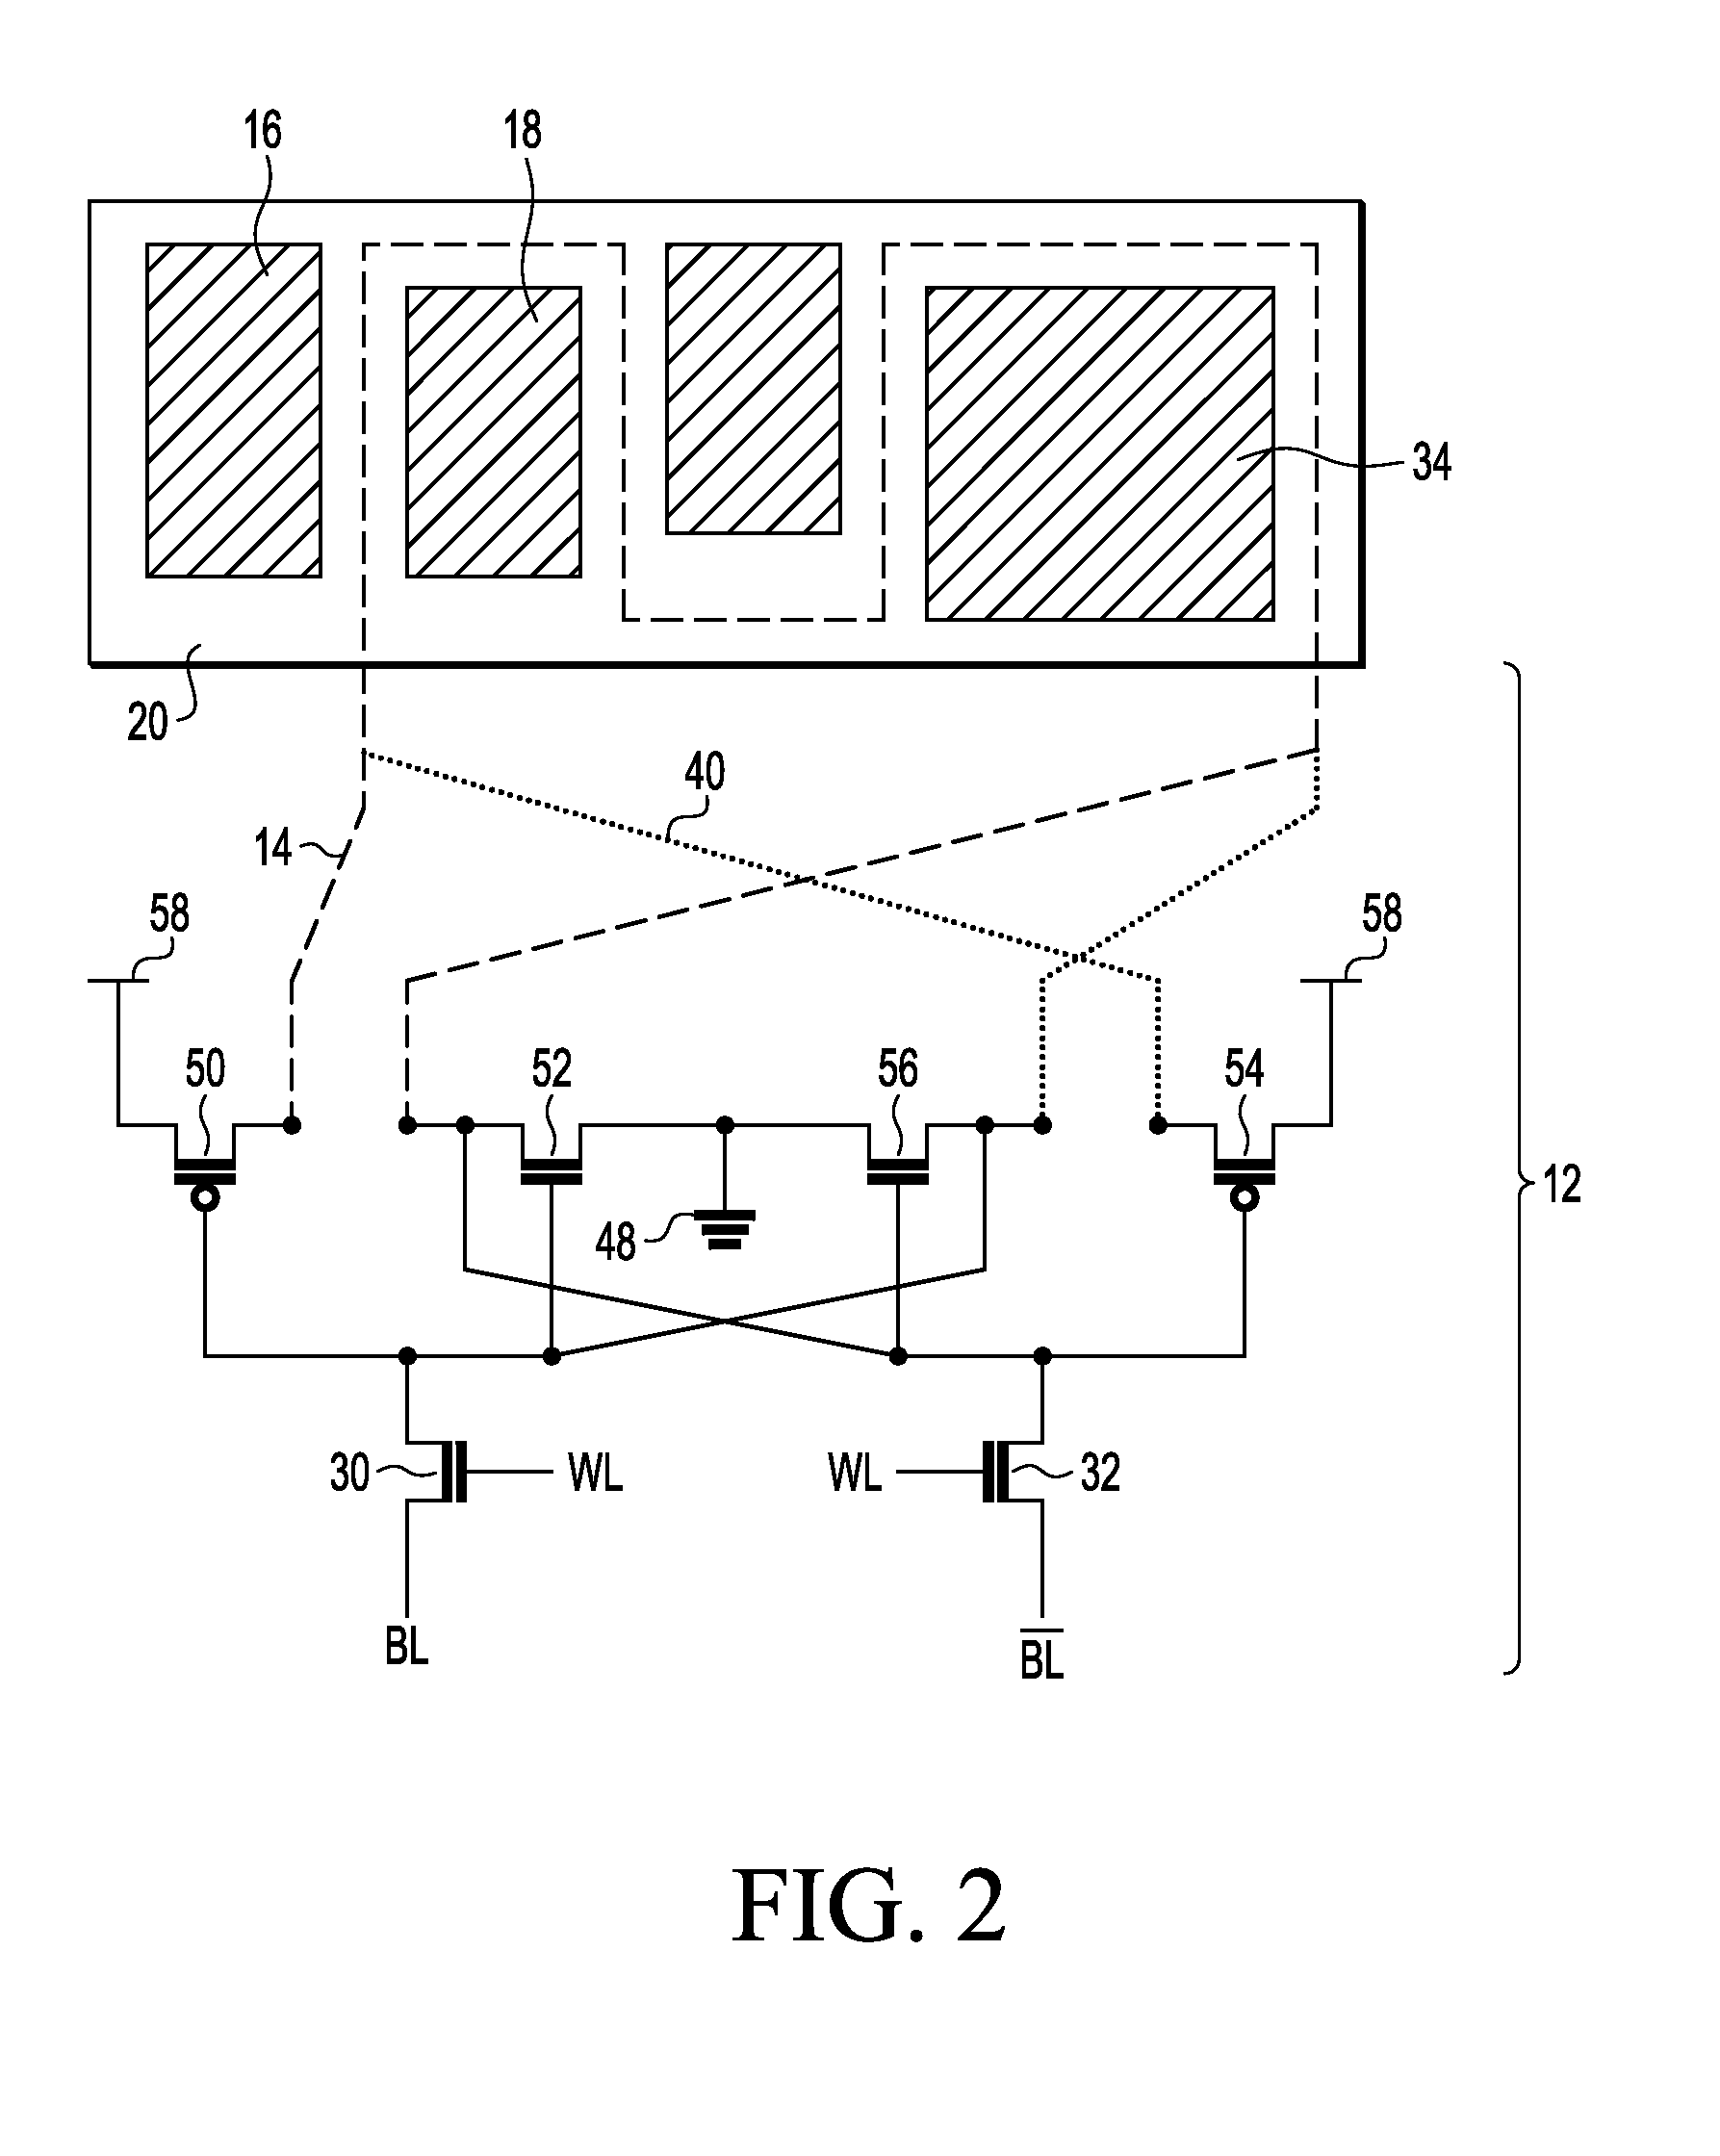 Chip damage detection device for a semiconductor integrated circuit